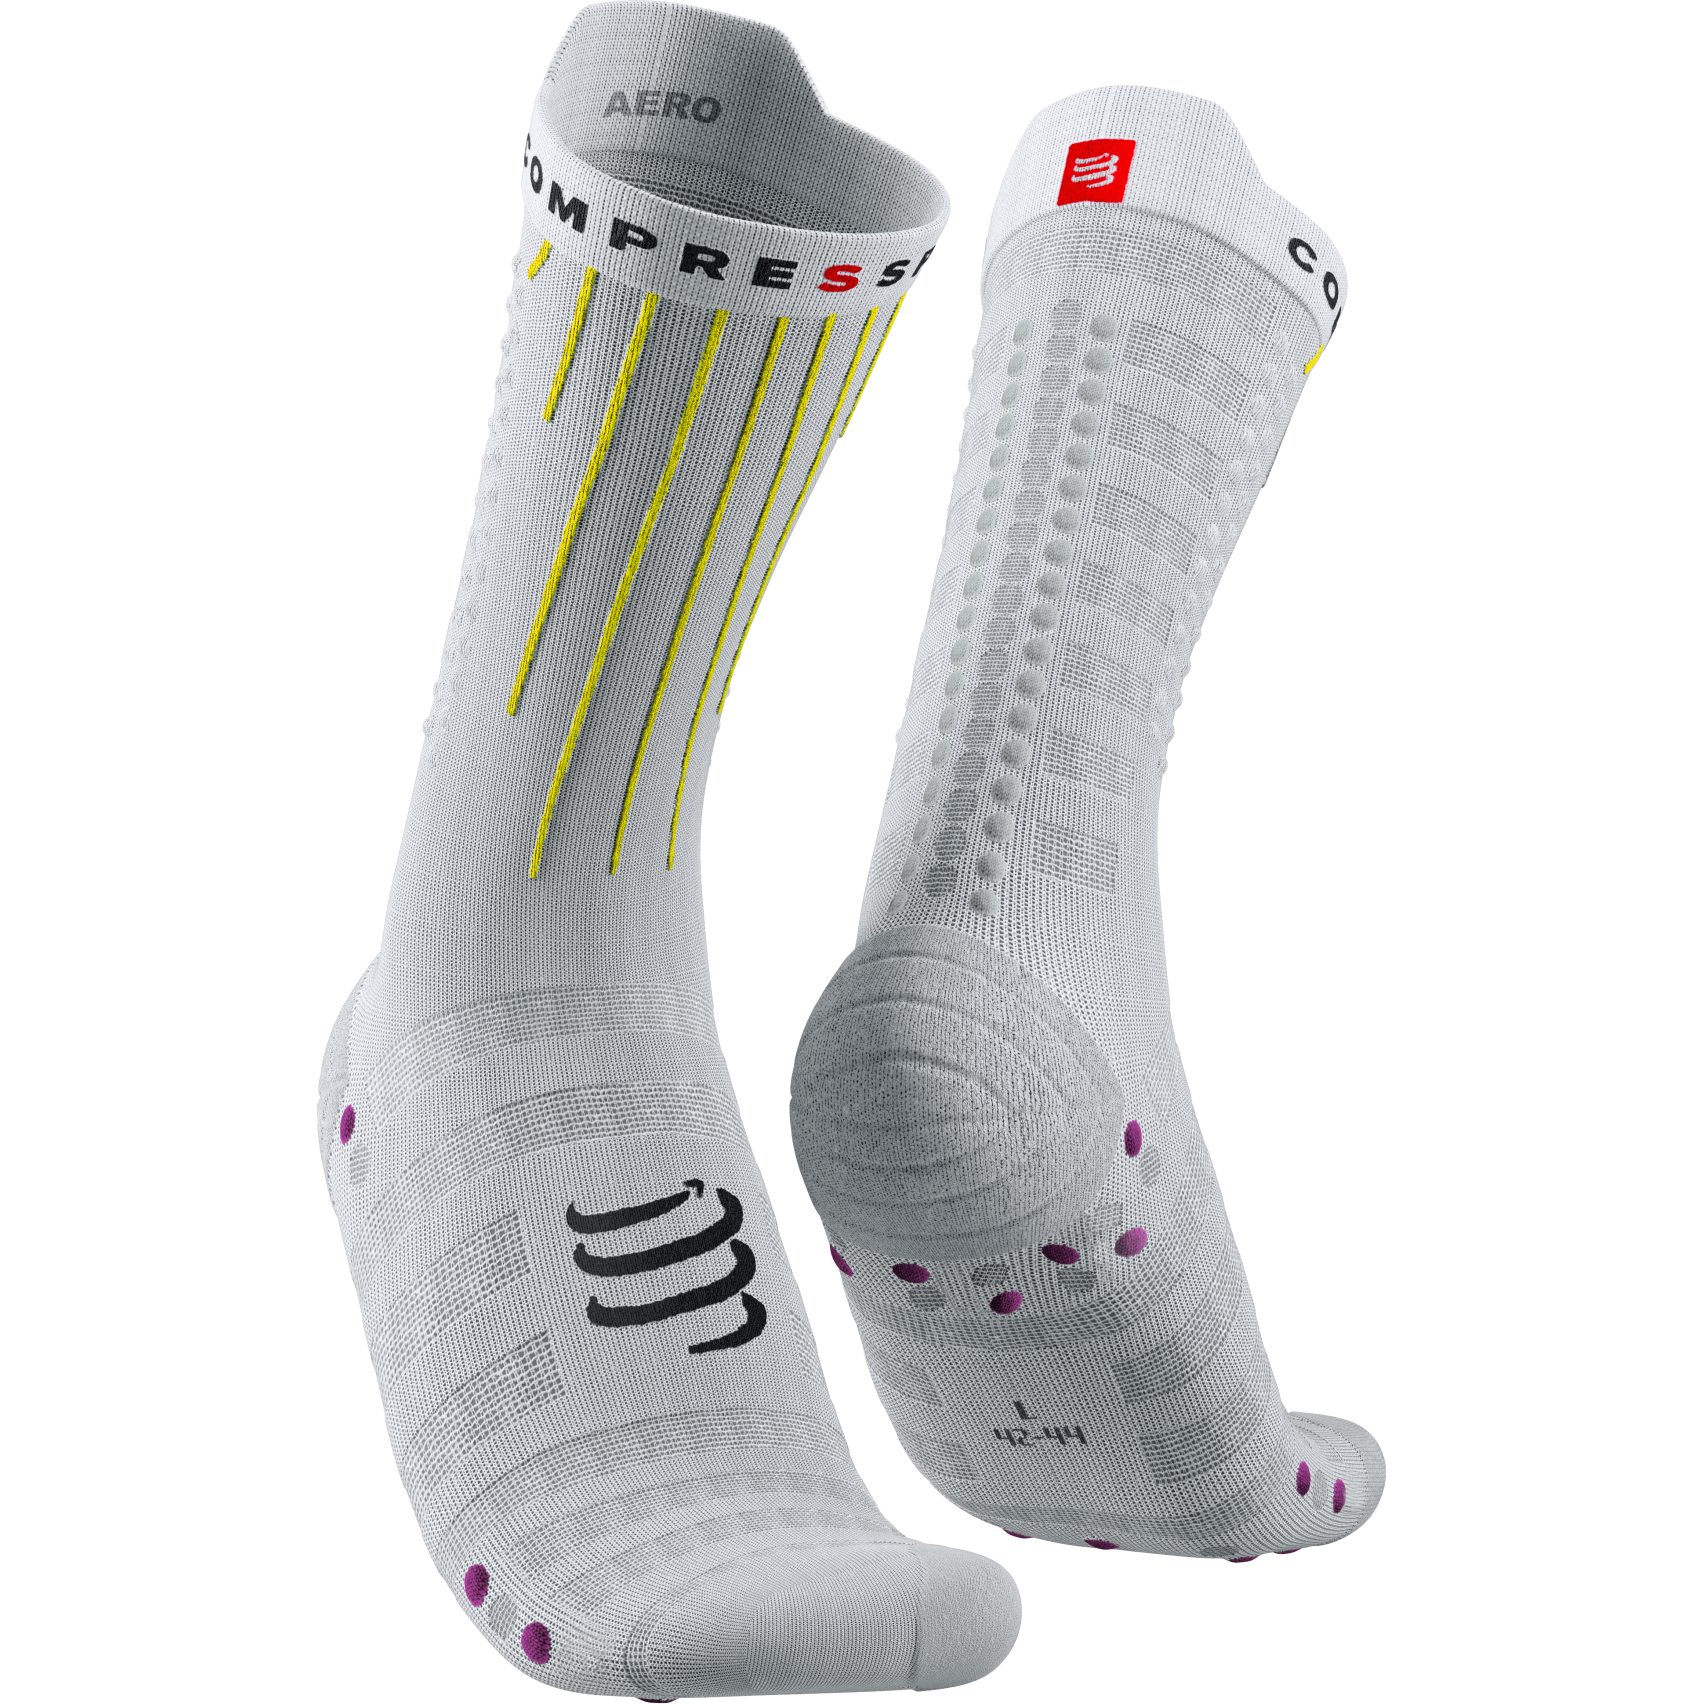 Picture of Compressport Aero Compression Socks - white/safety yellow/neon pink